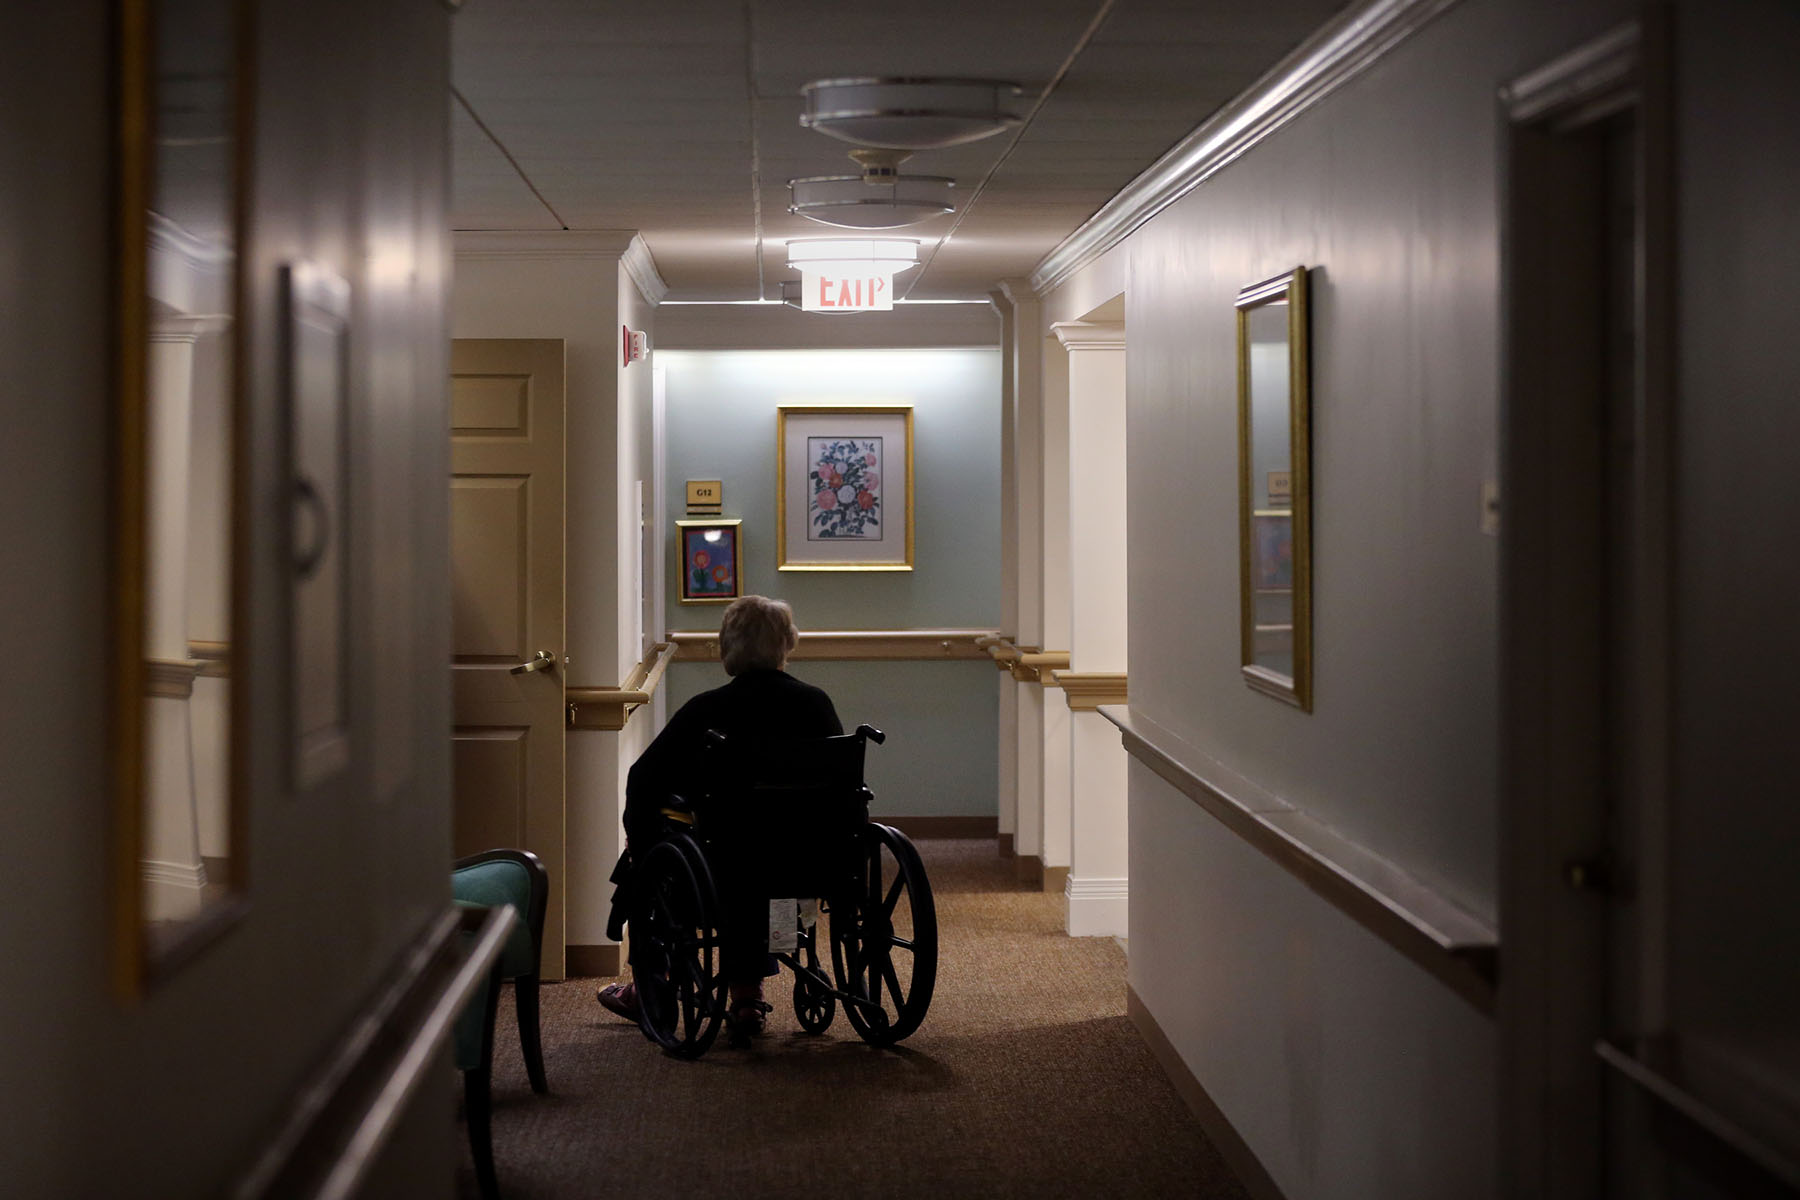 A resident is seen sitting in a wheelchair at the end of a hallways in an assisted living facility.